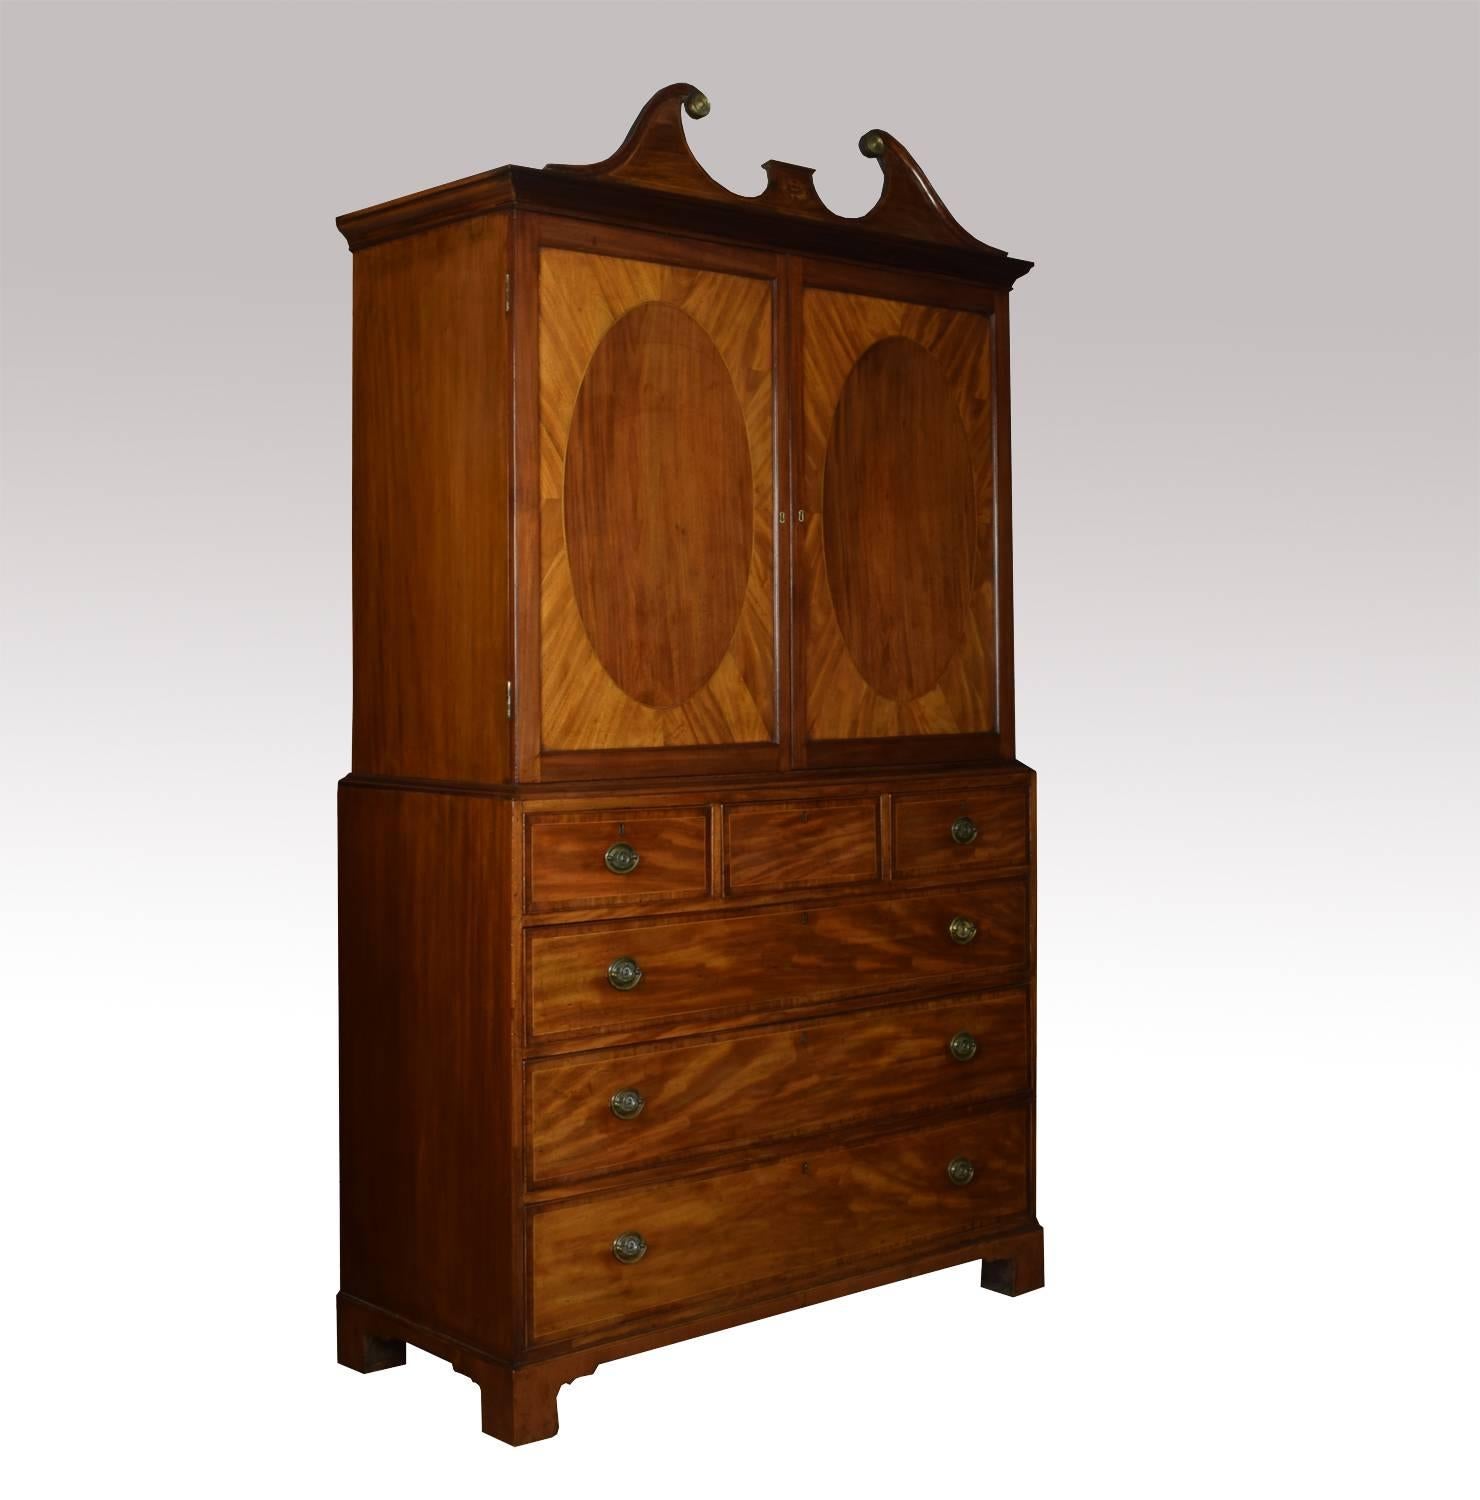 Fine 18th century George III period mahogany gentleman’s cabinet on chest with inlaid swan neck pediment above two oval panelled doors opening to reveal five graduated draws. The base section fitted with three short and three long graduated draws